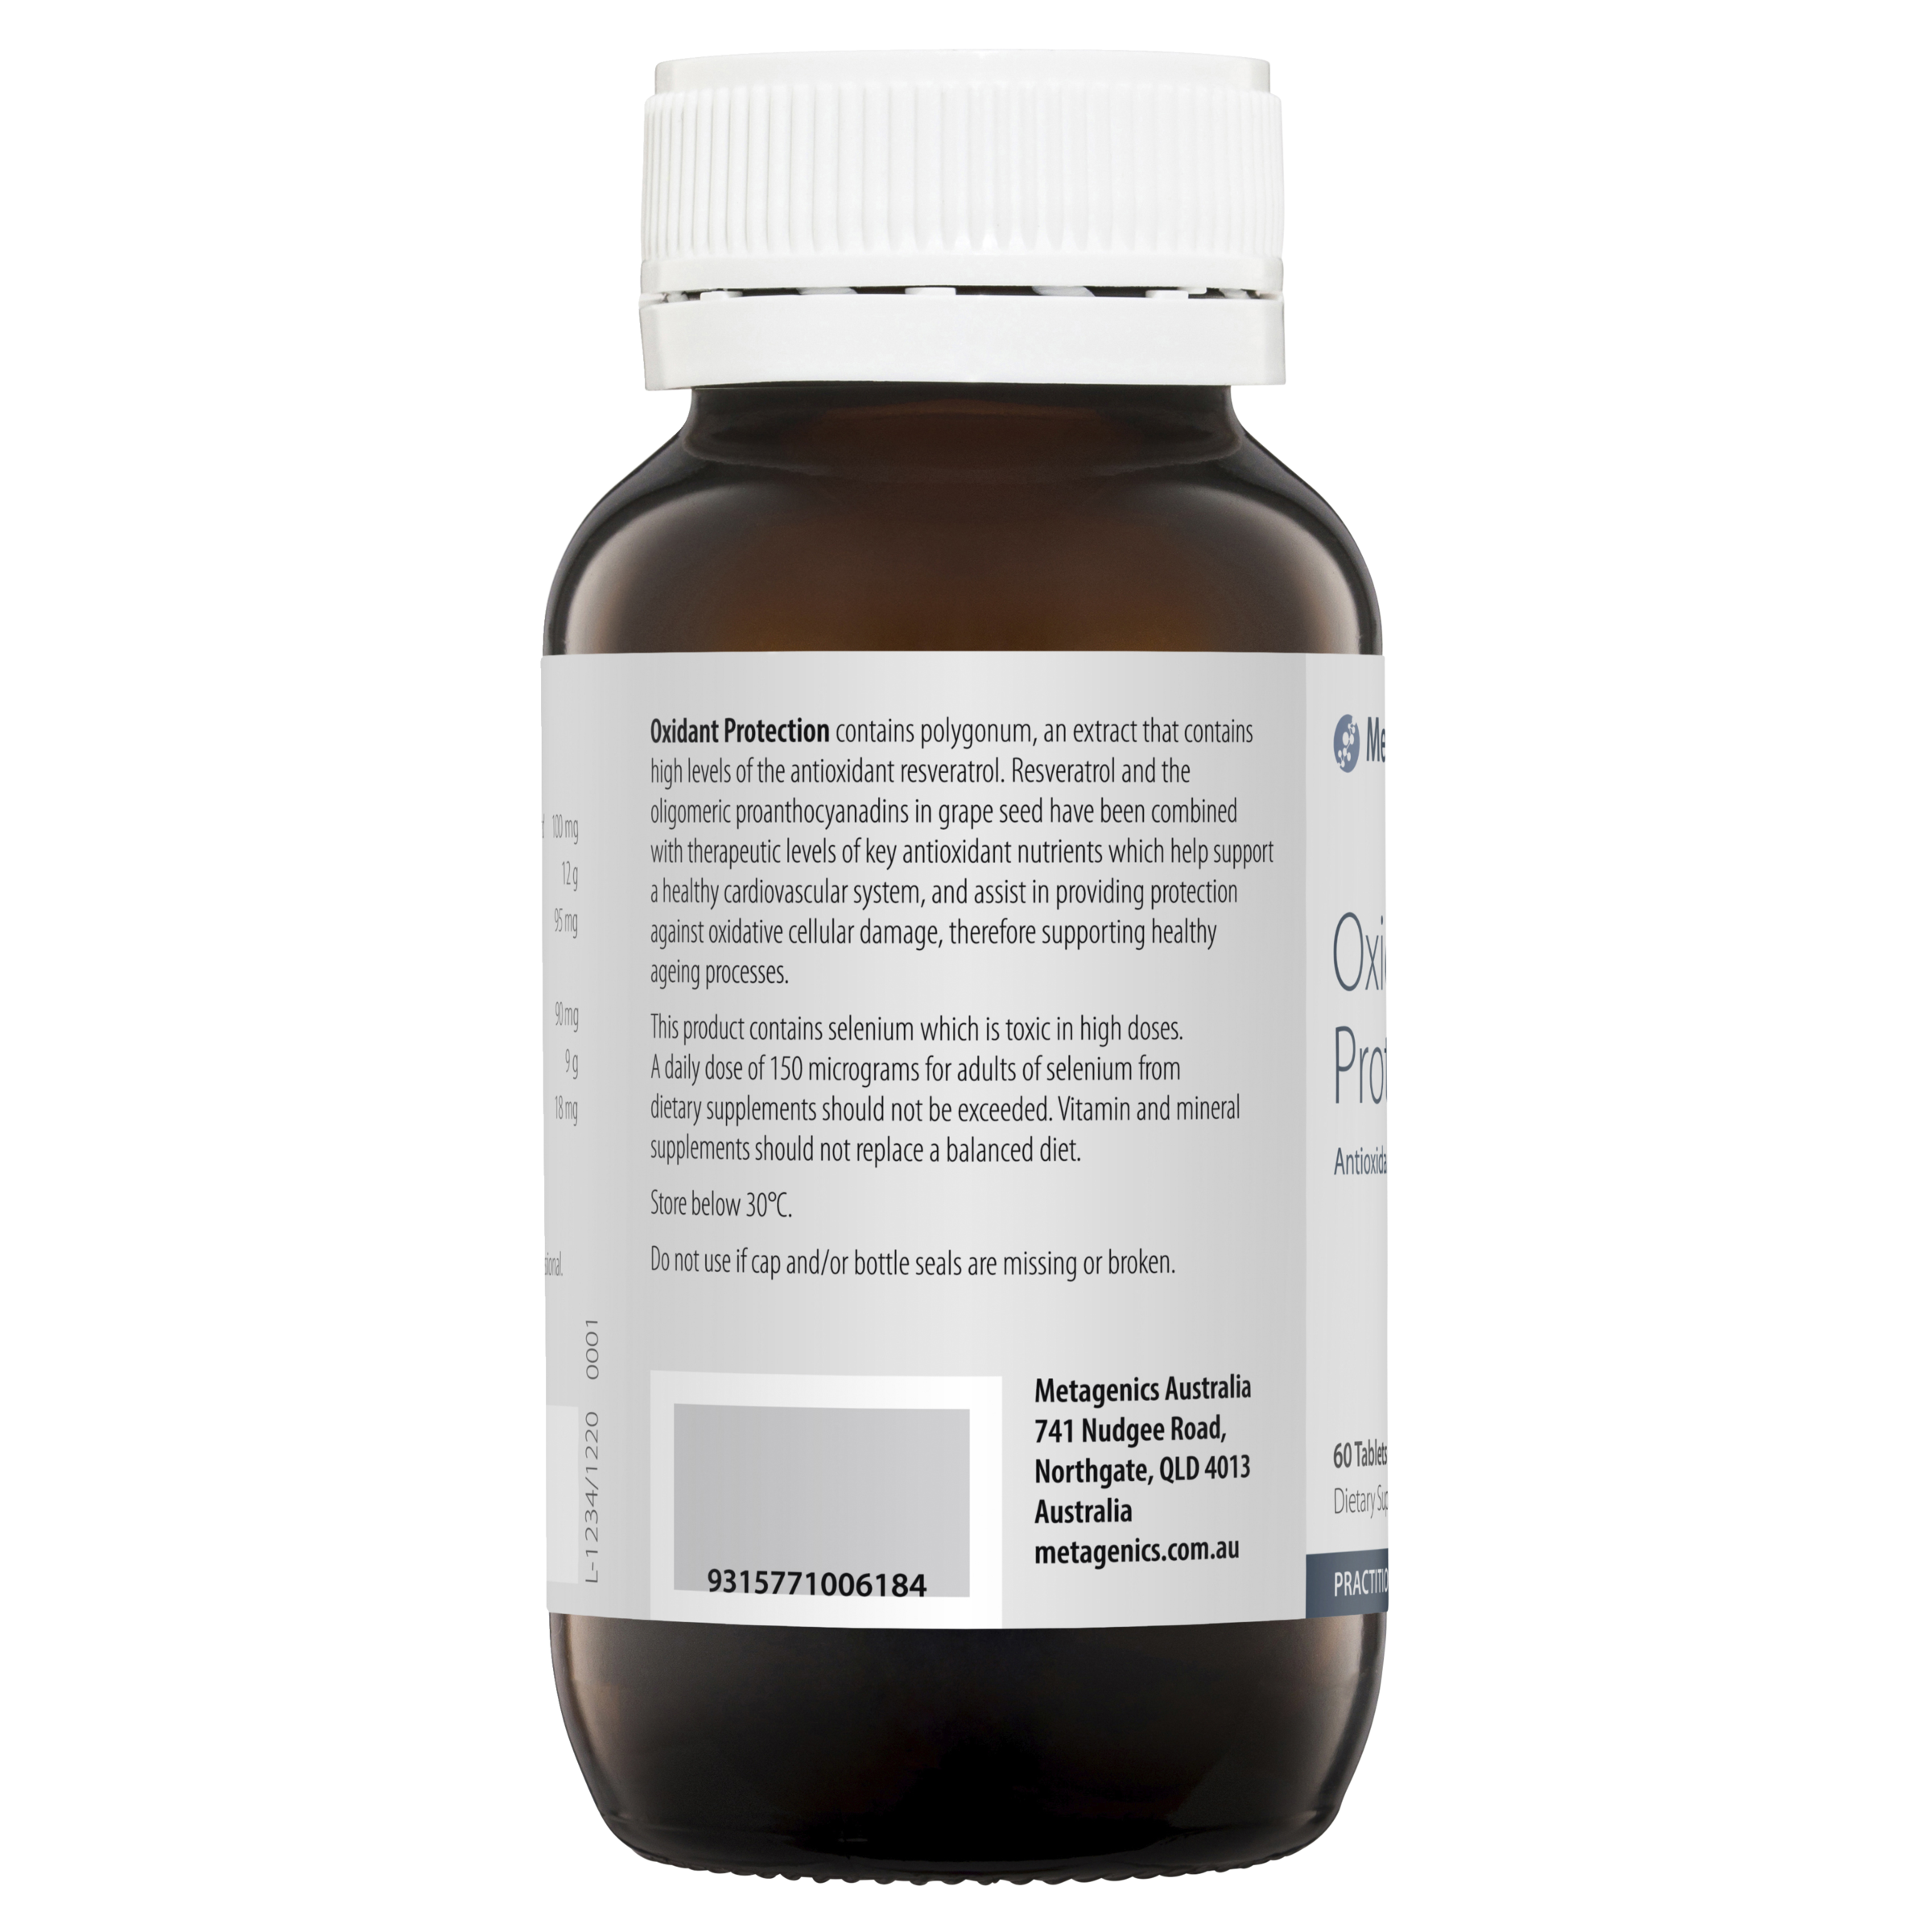 Metagenics Oxidant Protection 60 Tablets